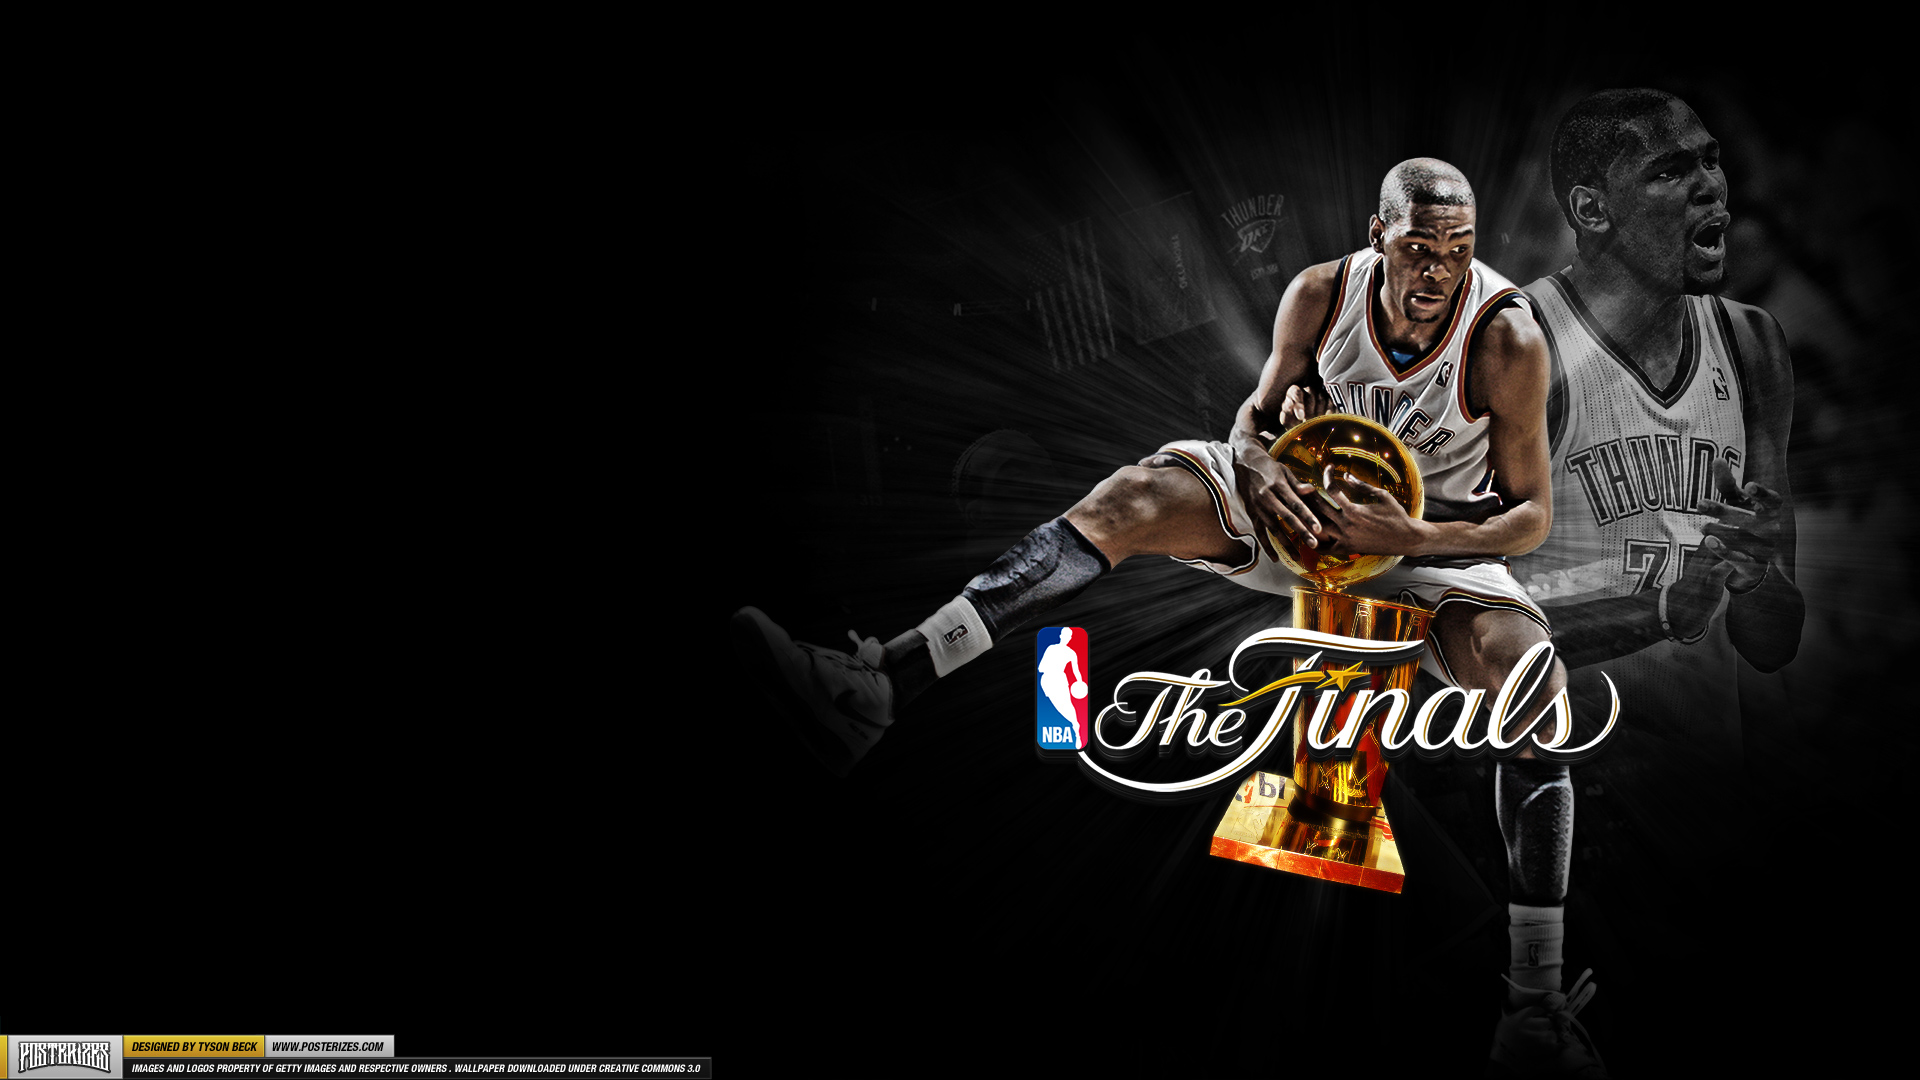 wallpaper nba durant trophy twitter kevin hunting online